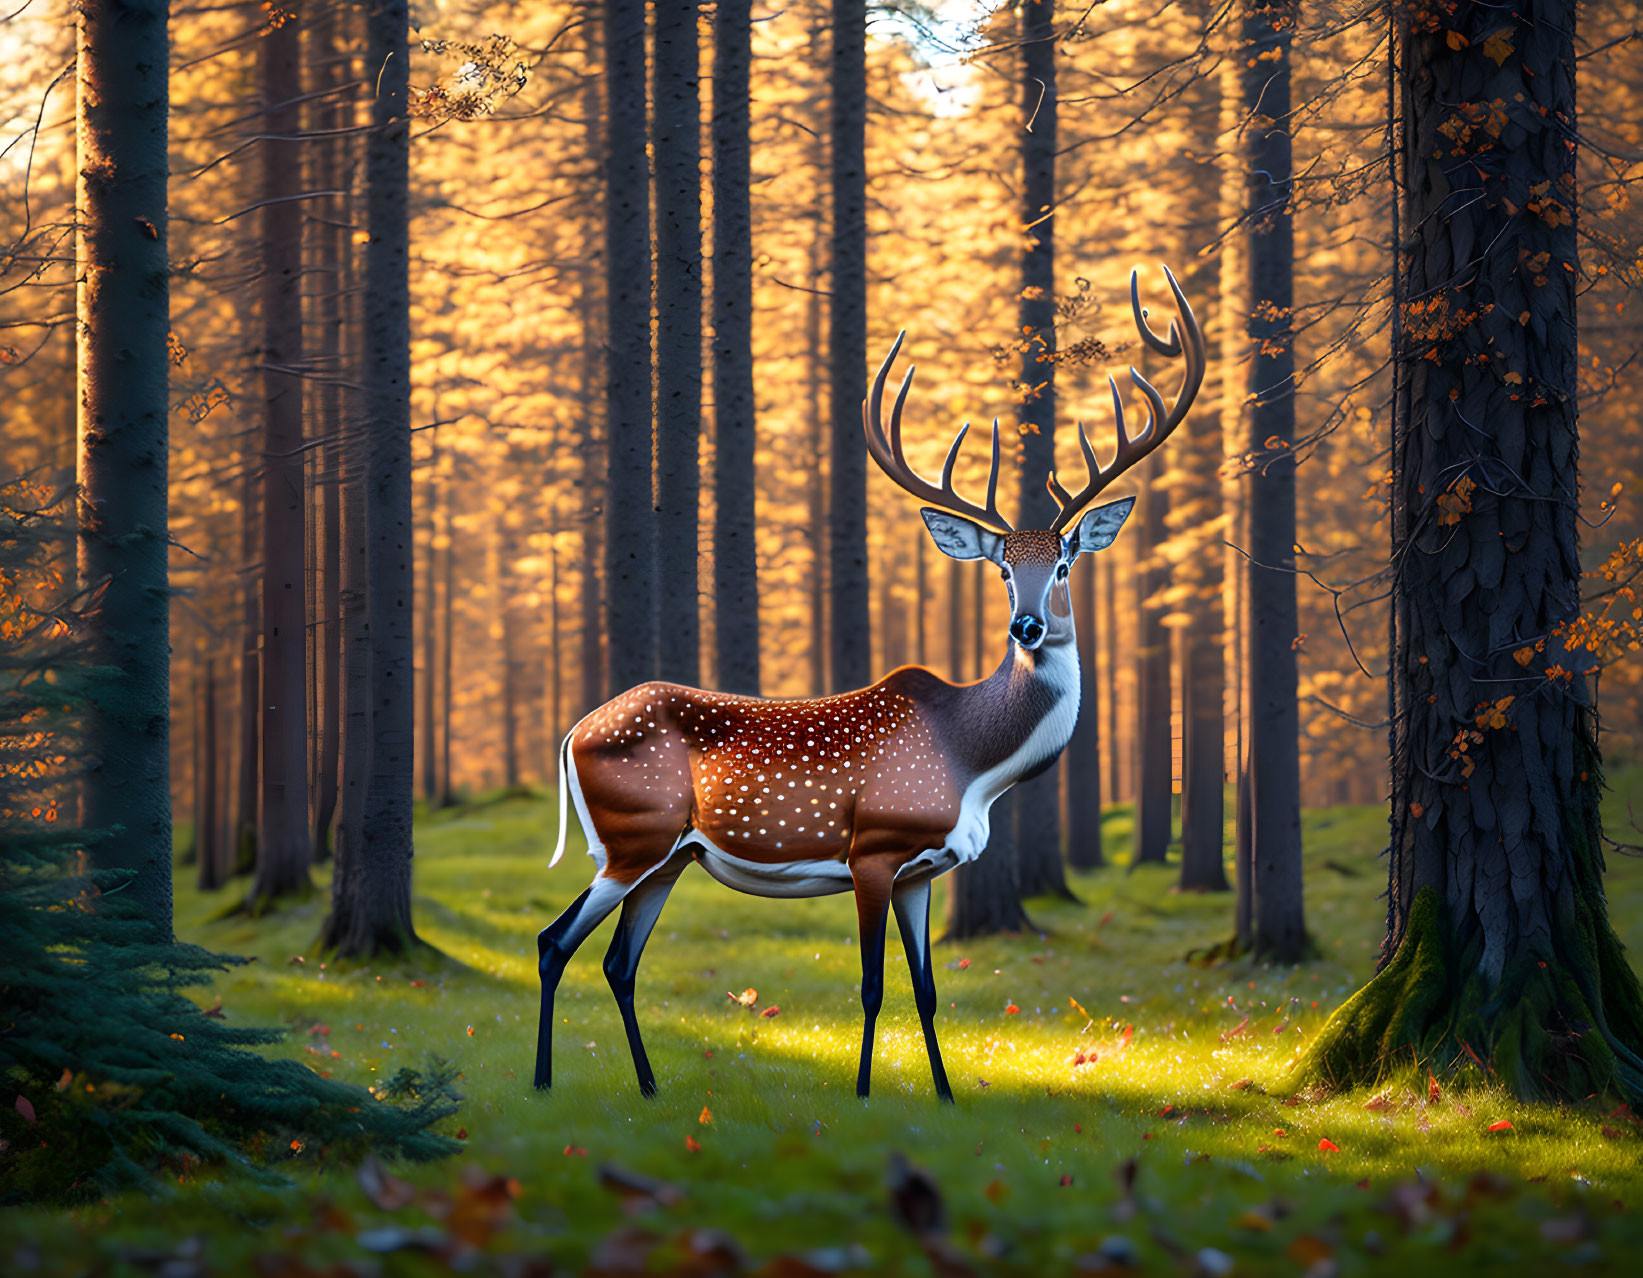 Majestic deer with impressive antlers in sunlit forest